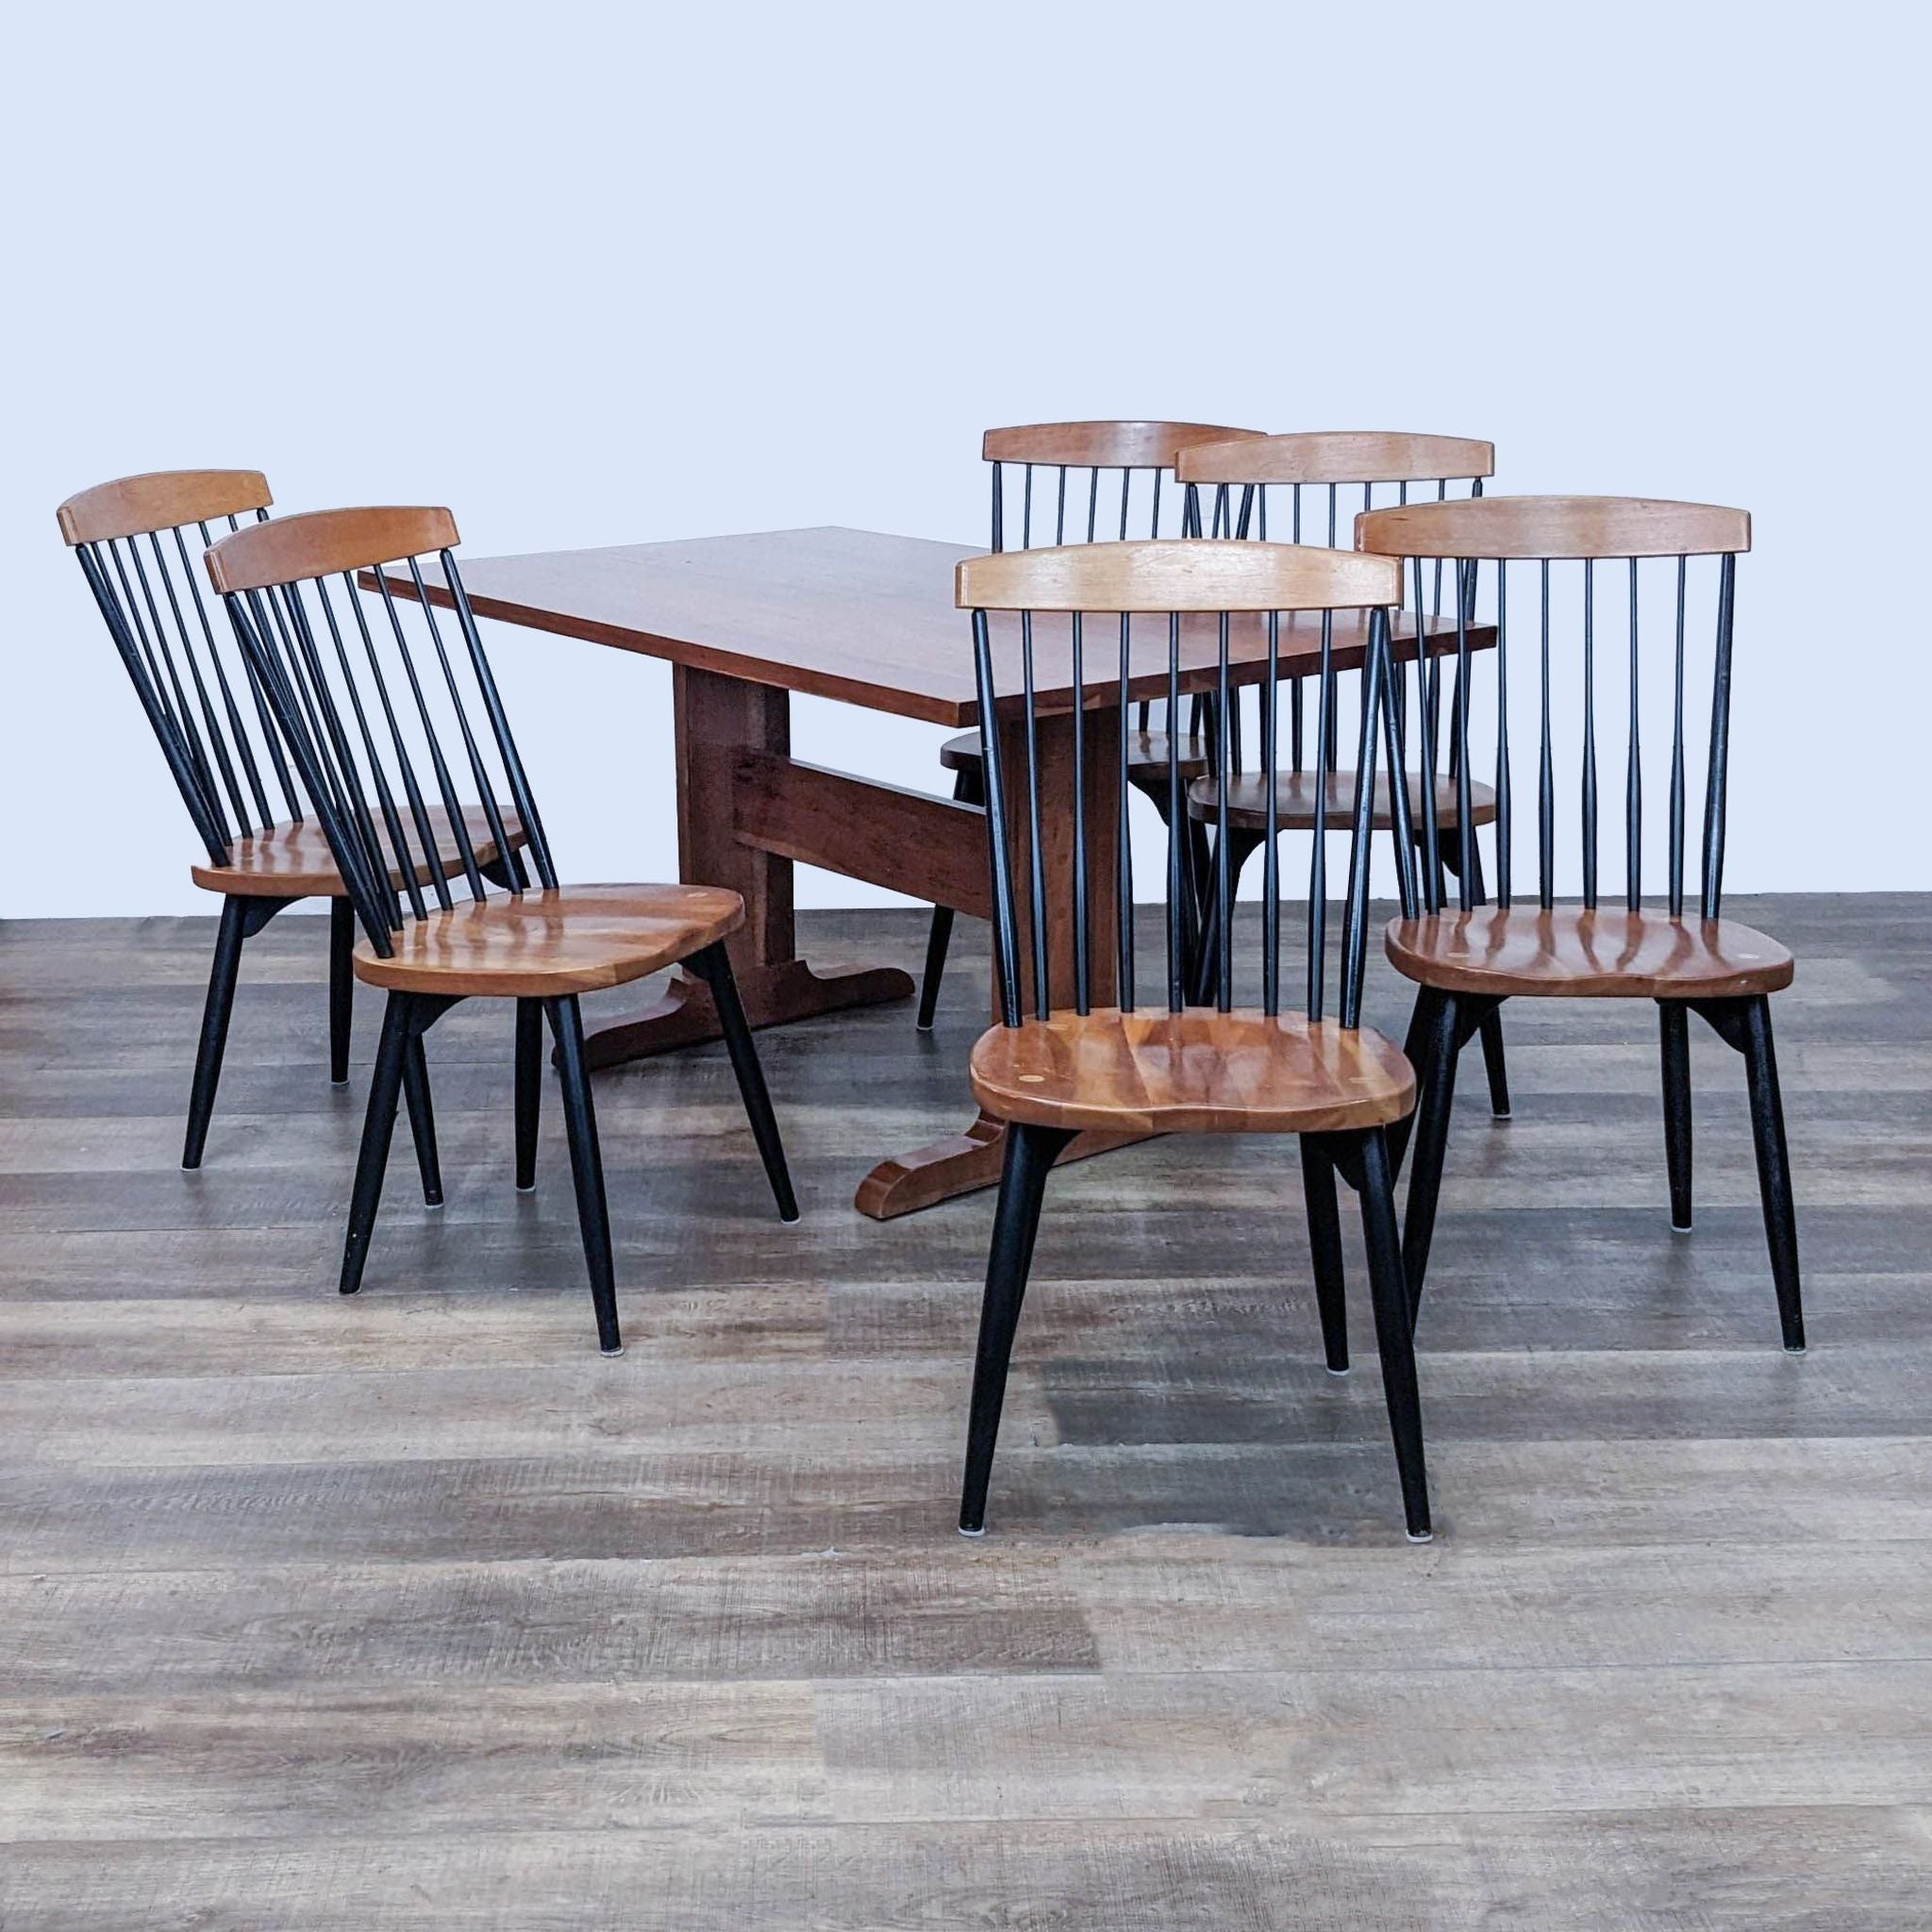 Contemporary W.A. Mitchell dining set with square table and six black spindle-back chairs with natural seats.